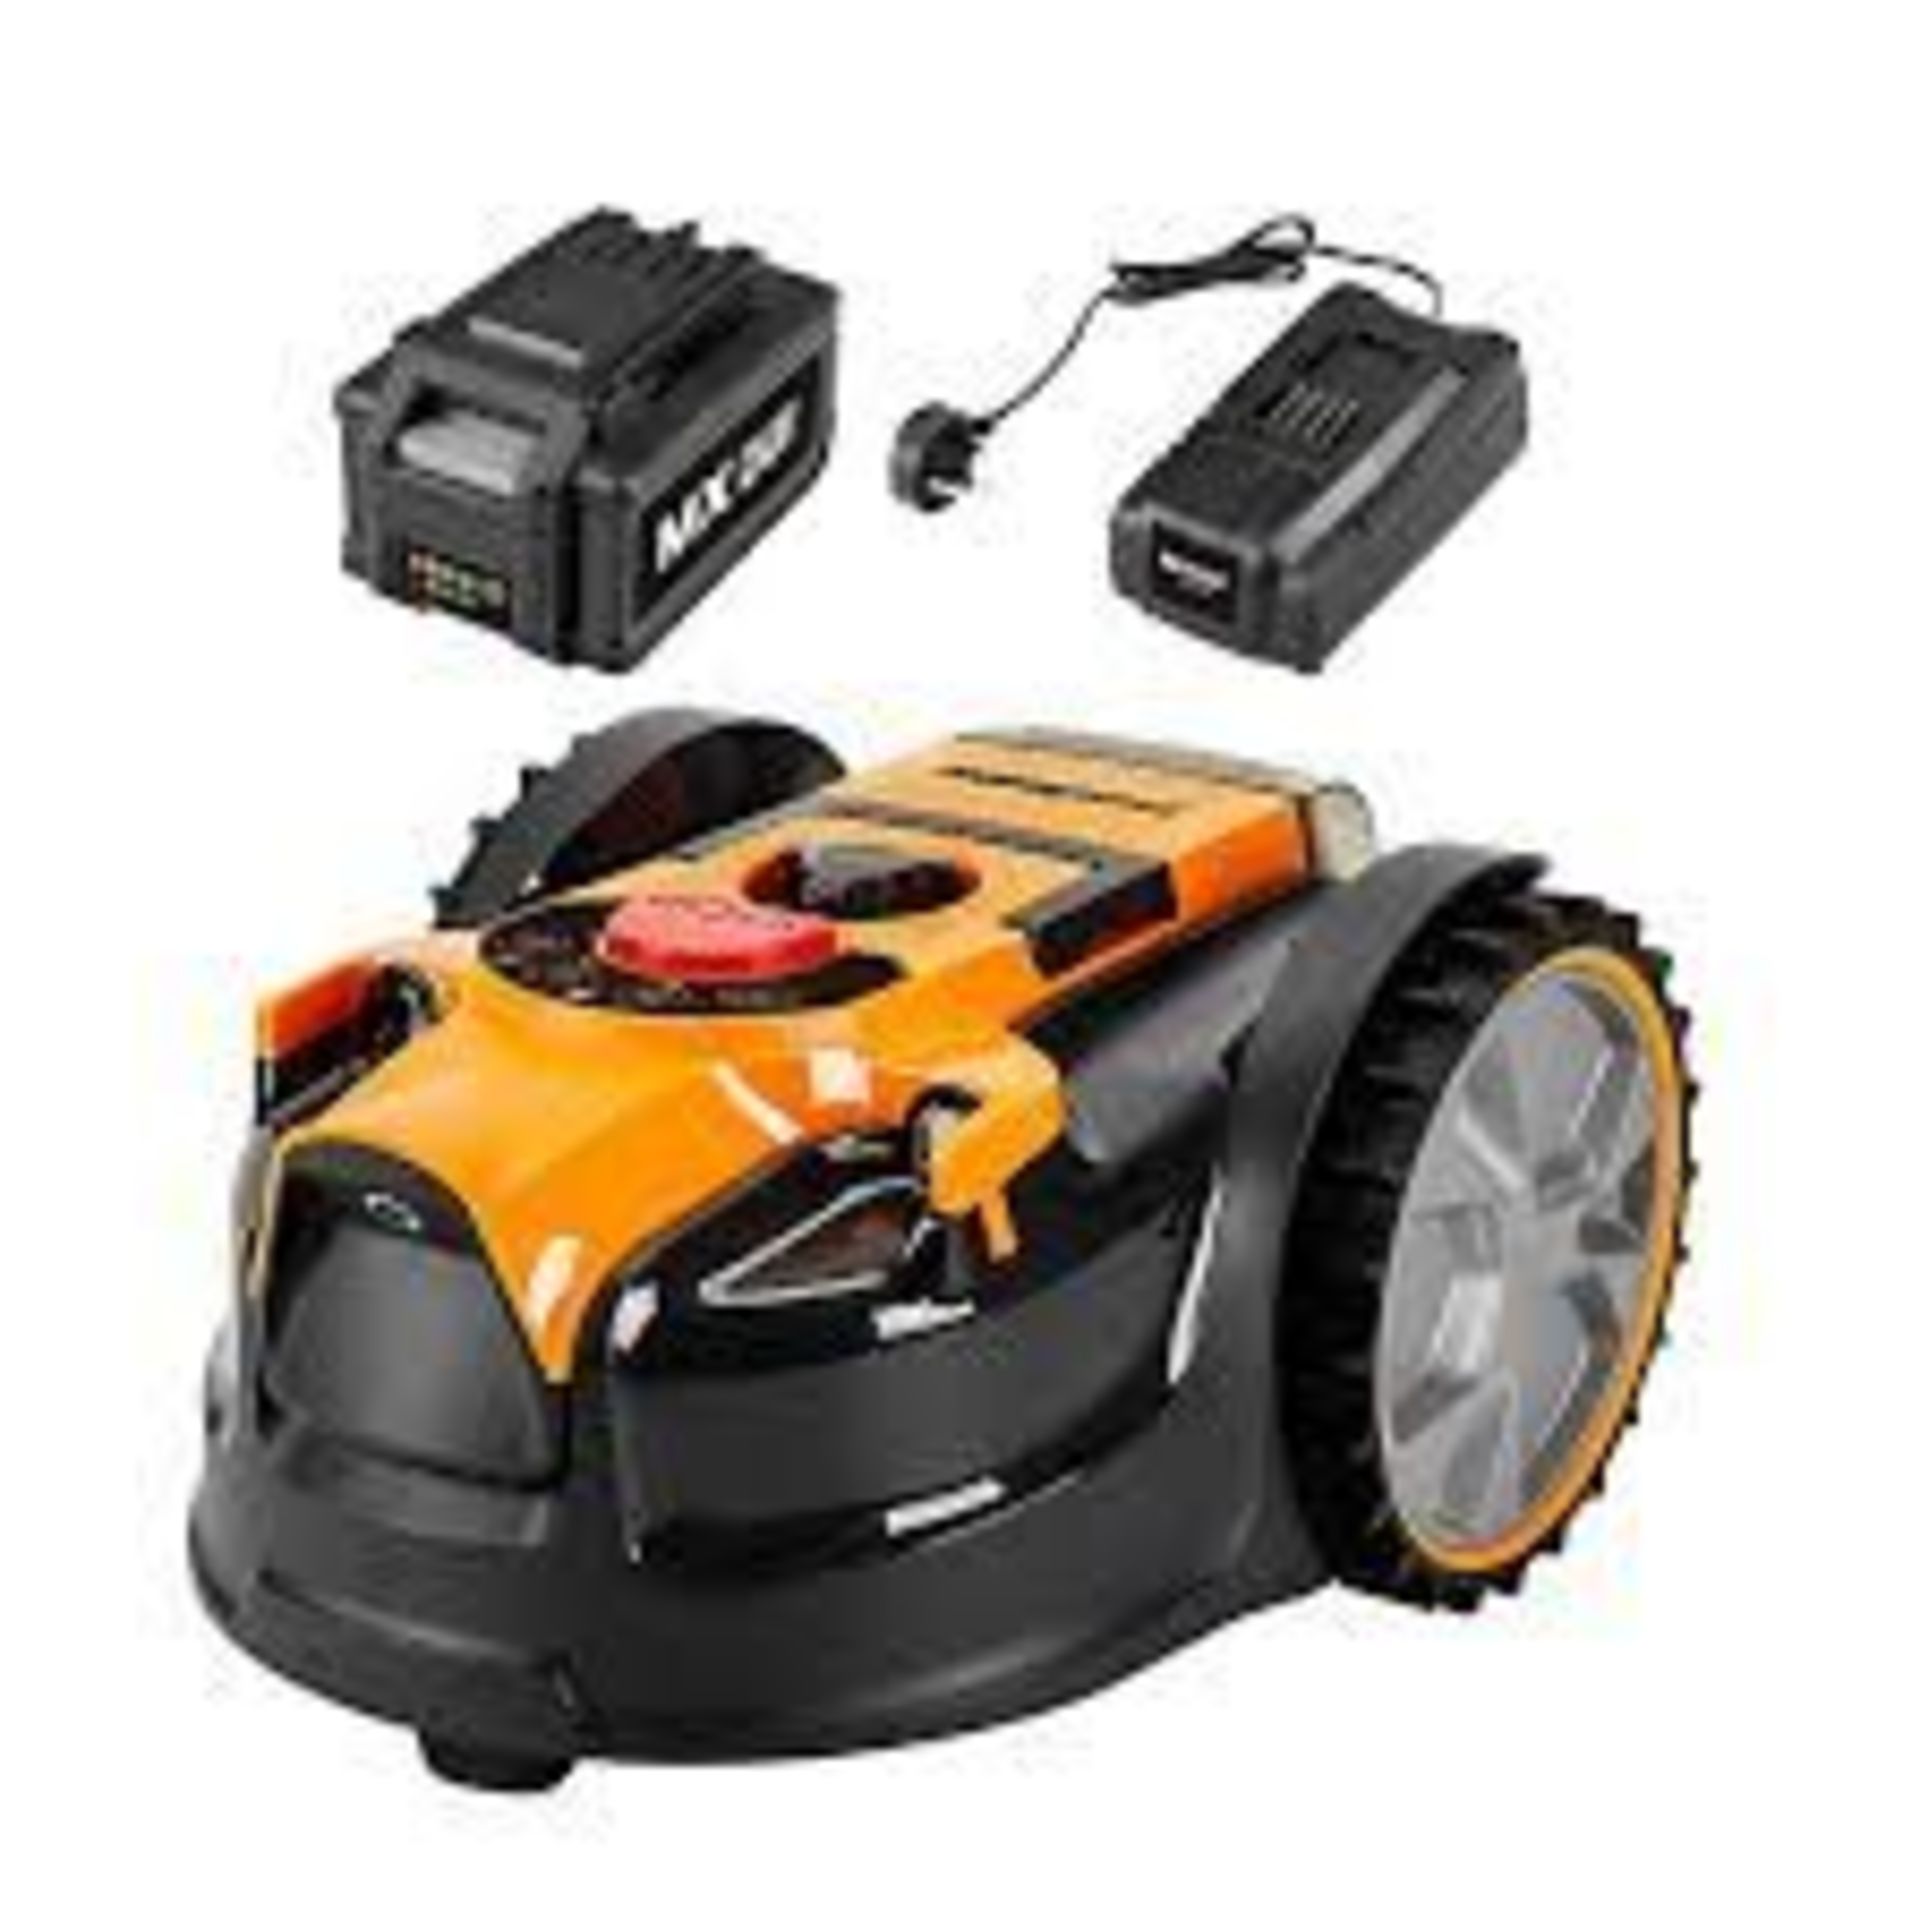 LawnMaster VBRM16 OcuMow™ MX 24V Drop and Mow Robotic Mower. - R14.7. Simply drop and mow. The